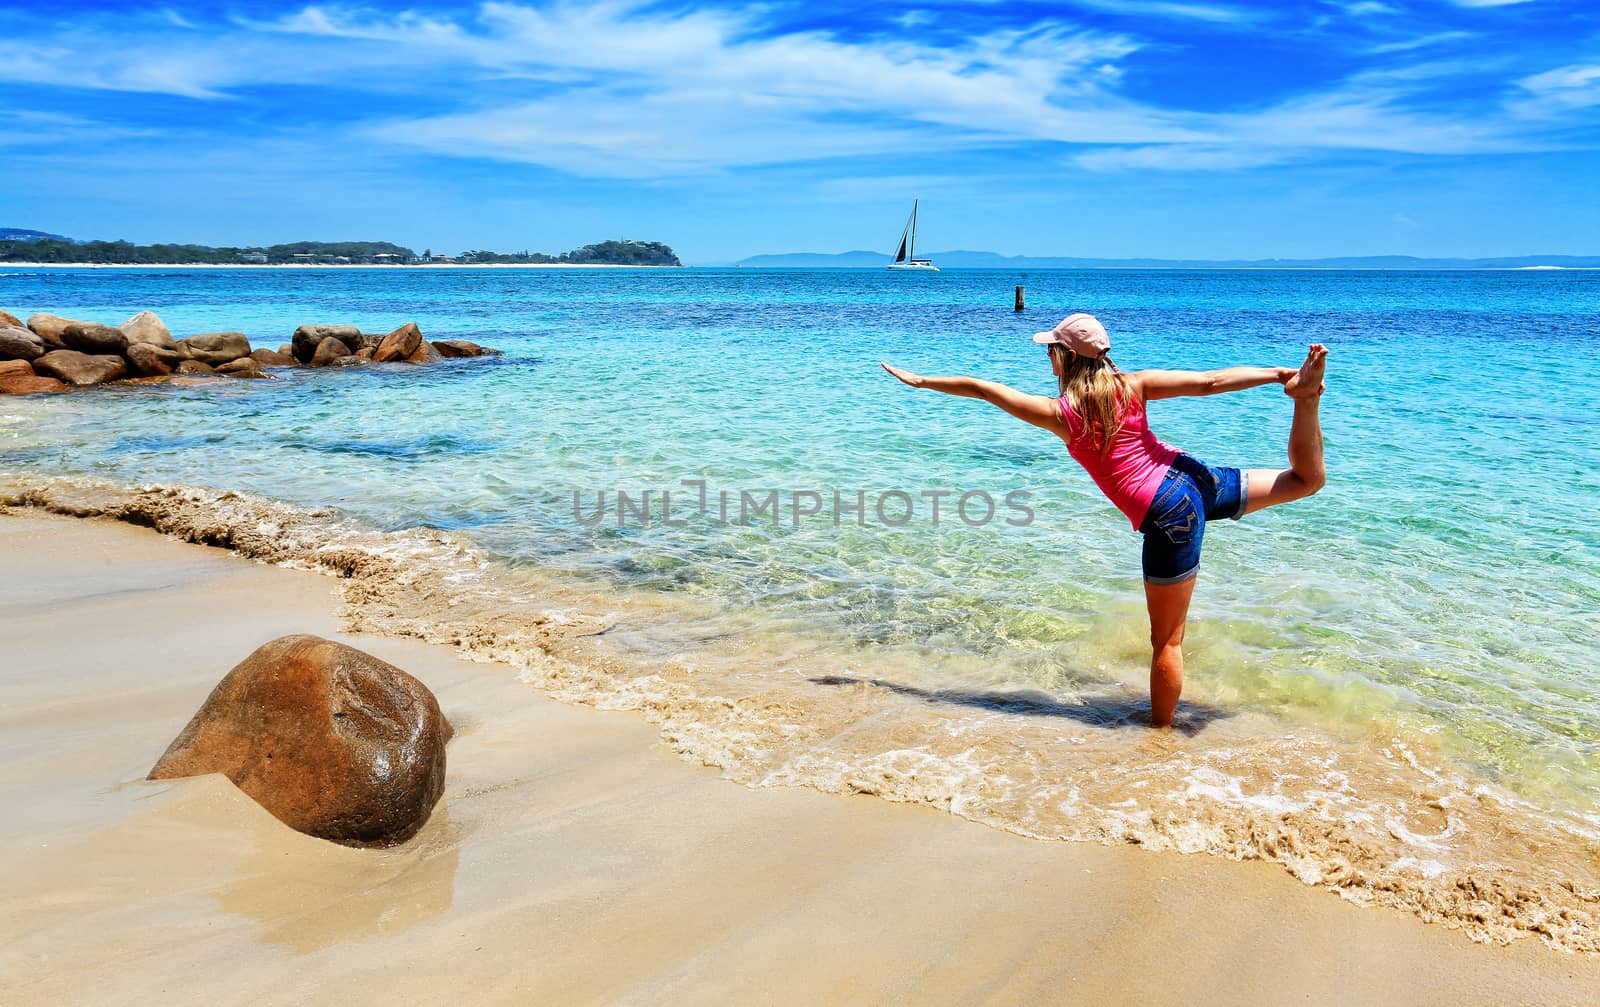 Balancing on moving sand.  A woman practices yoga on the beach with the shifting sands and tidal flows adding an extra dimension and difficulty to the usual asanas.